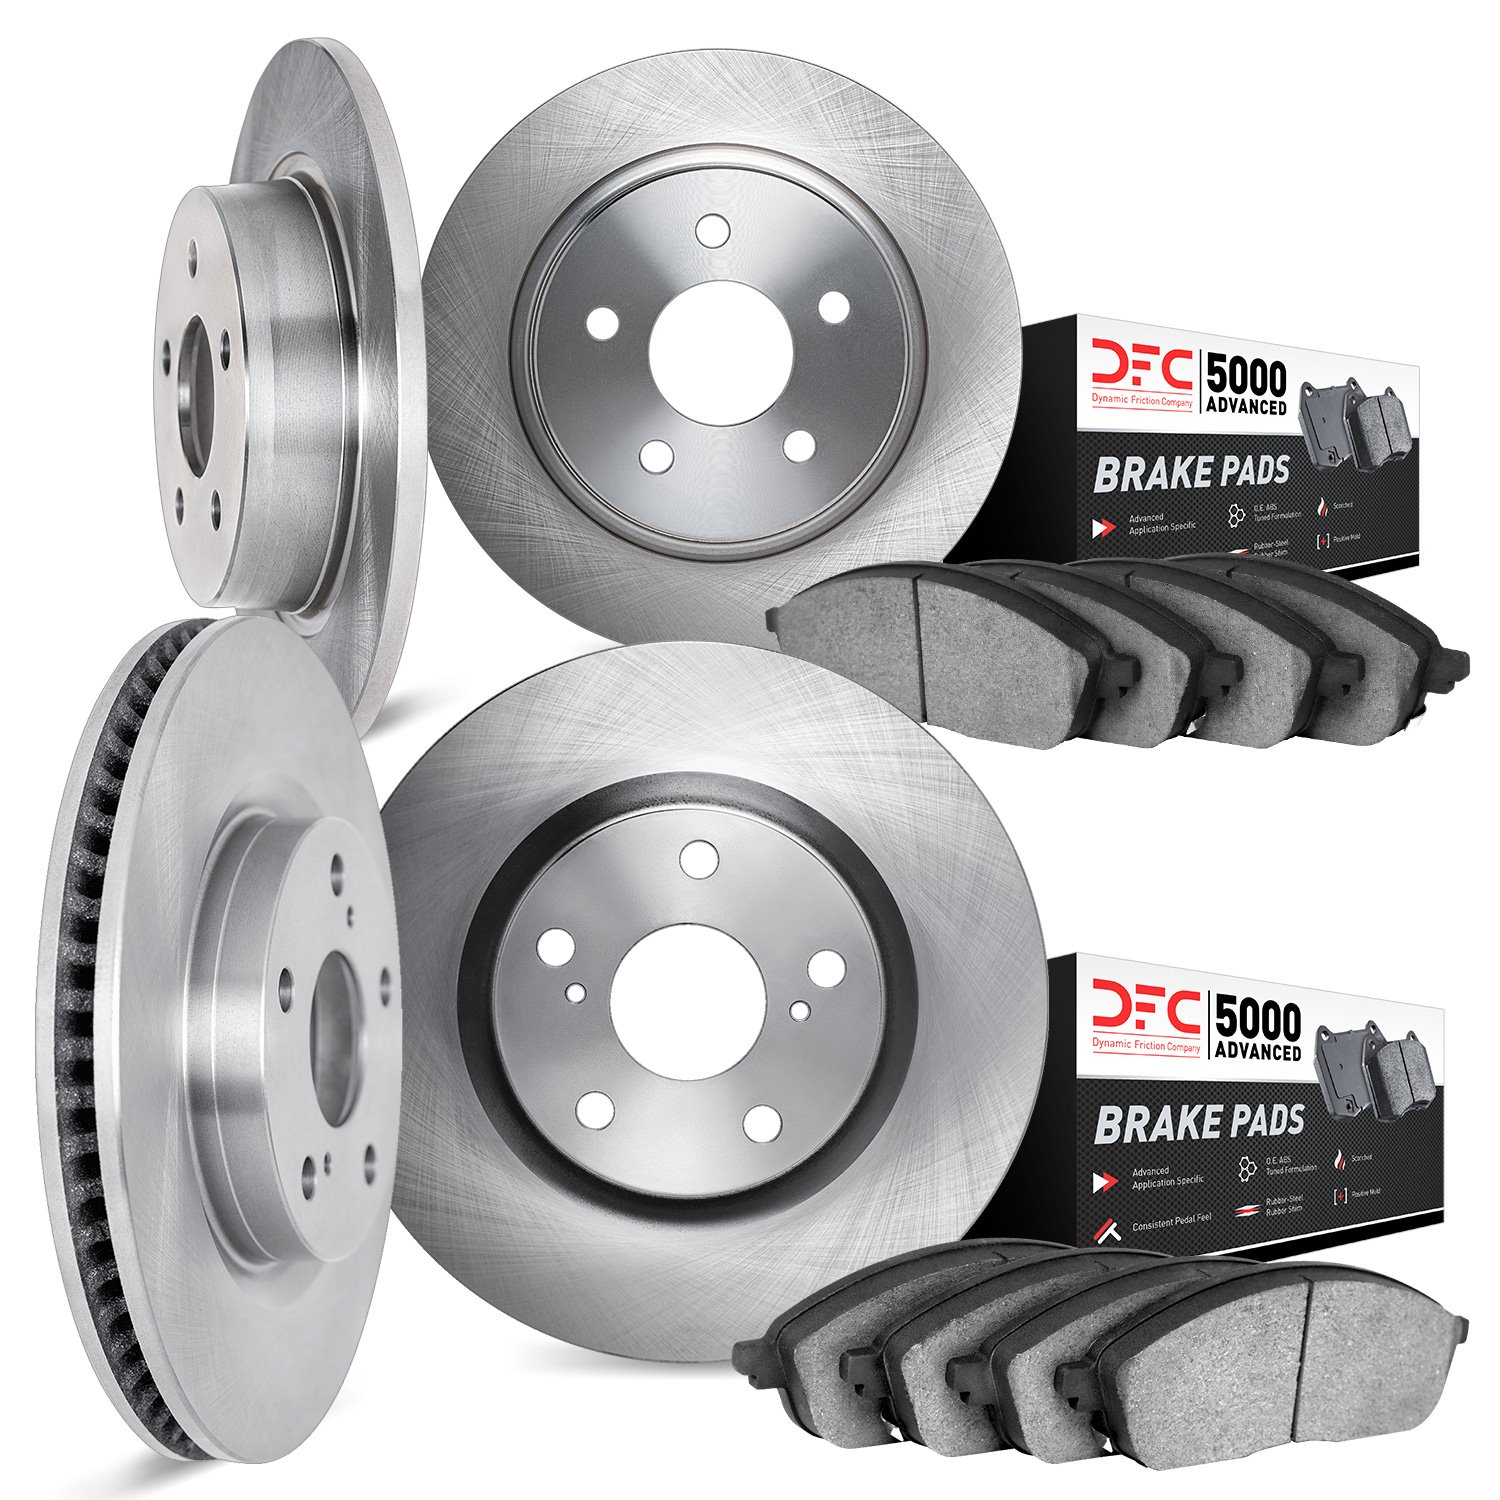 6504-20001 Brake Rotors w/5000 Advanced Brake Pads Kit, 2001-2004 Multiple Makes/Models, Position: Front and Rear